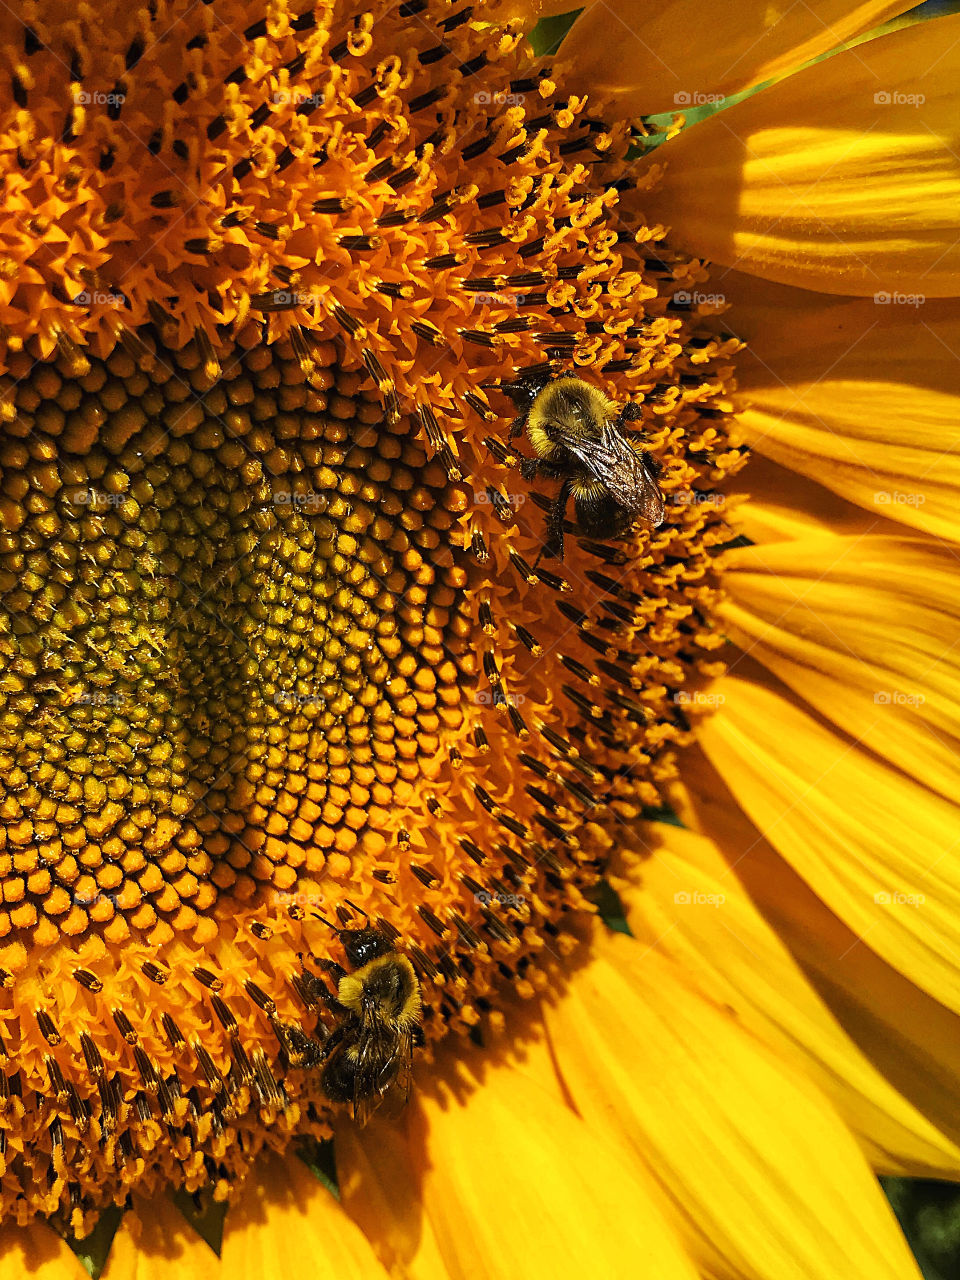 Bees and sunflowers 